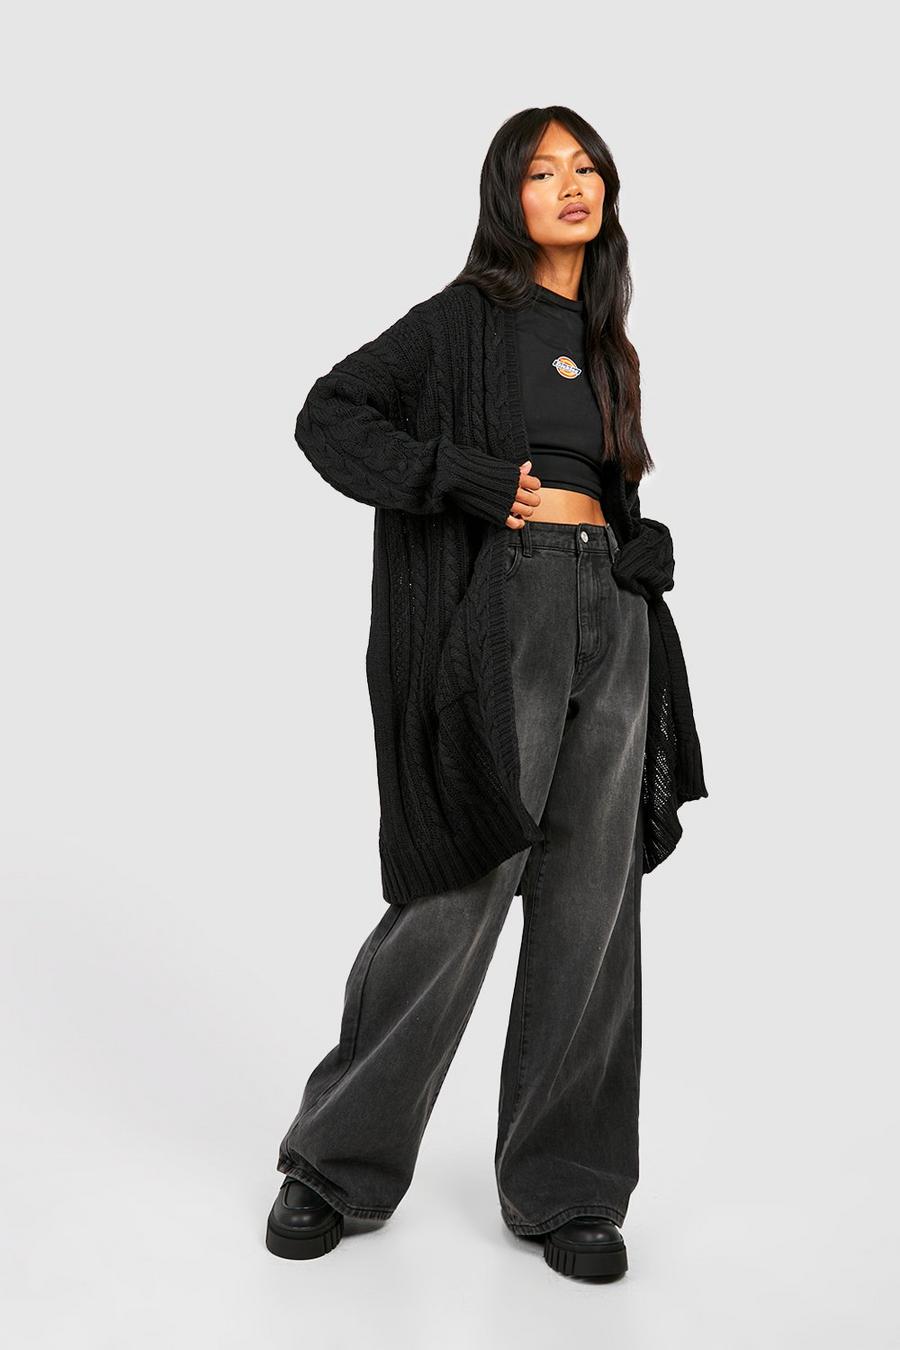 Black Oversized Slouchy Cable Knit Cardigan